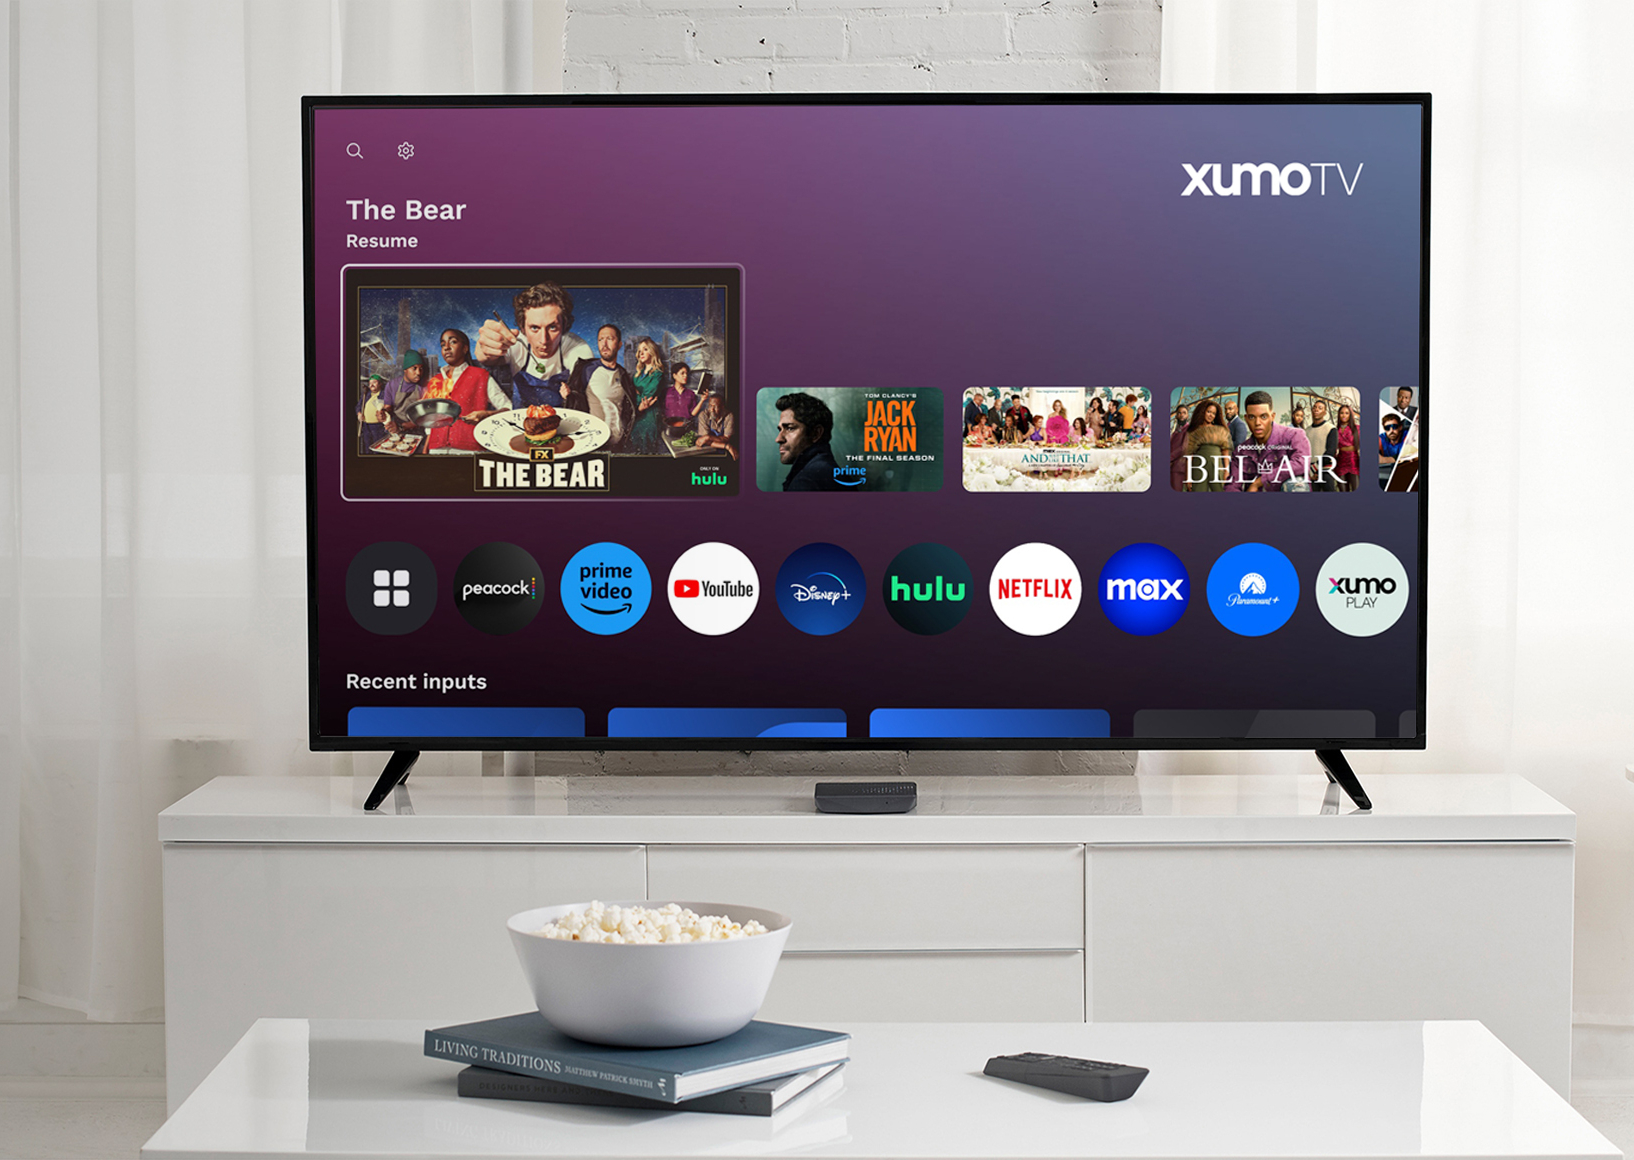 Xumo partners with Mediacom to bring its streaming box to Xtream Internet customers  News of cutting the umbilical cord